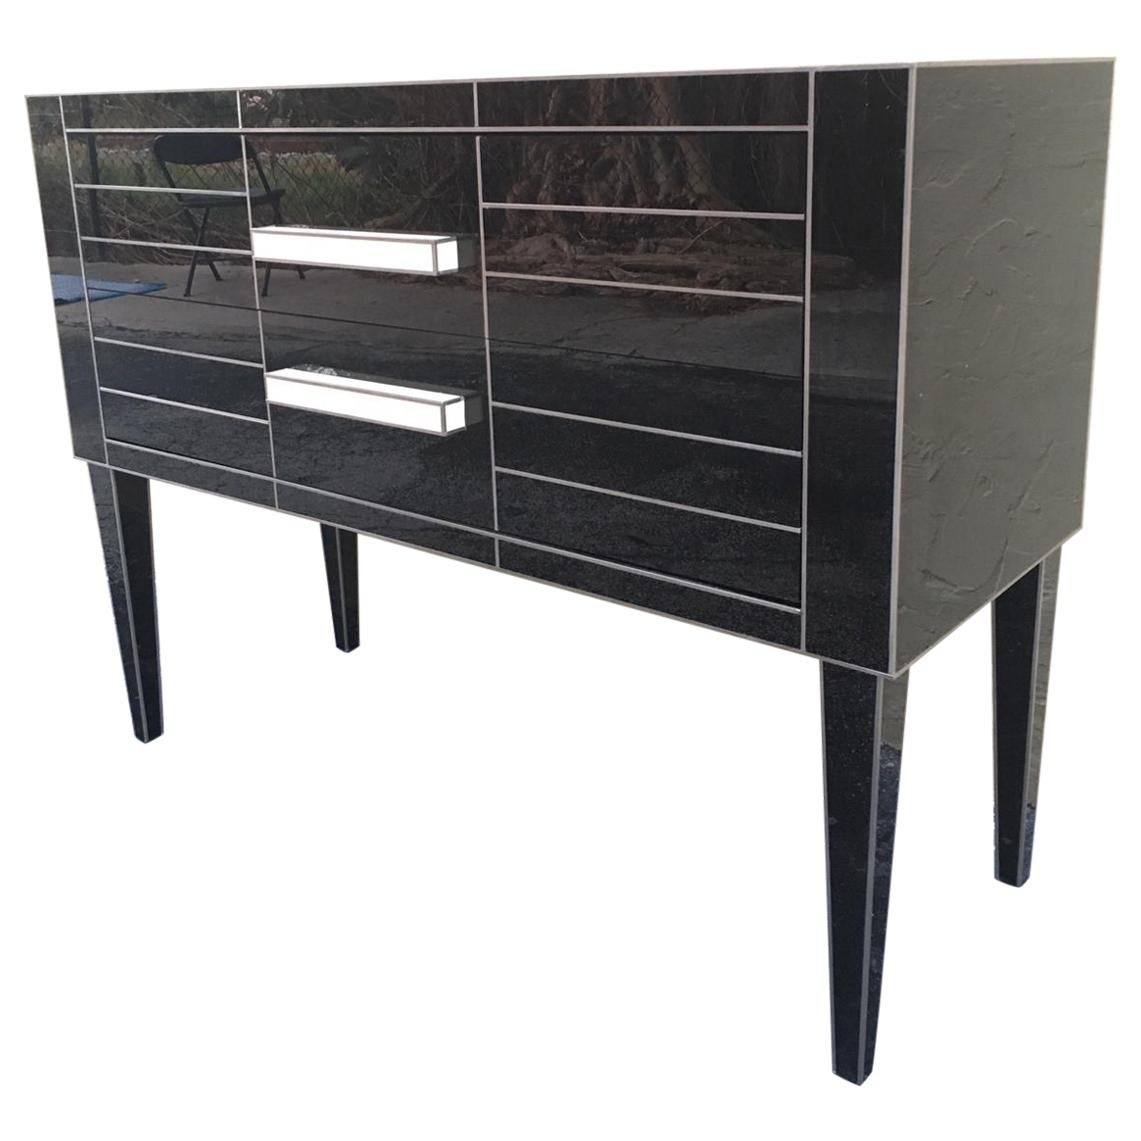 New Chest of Drawers in Black Mirror and Aluminium with White Glass Handle